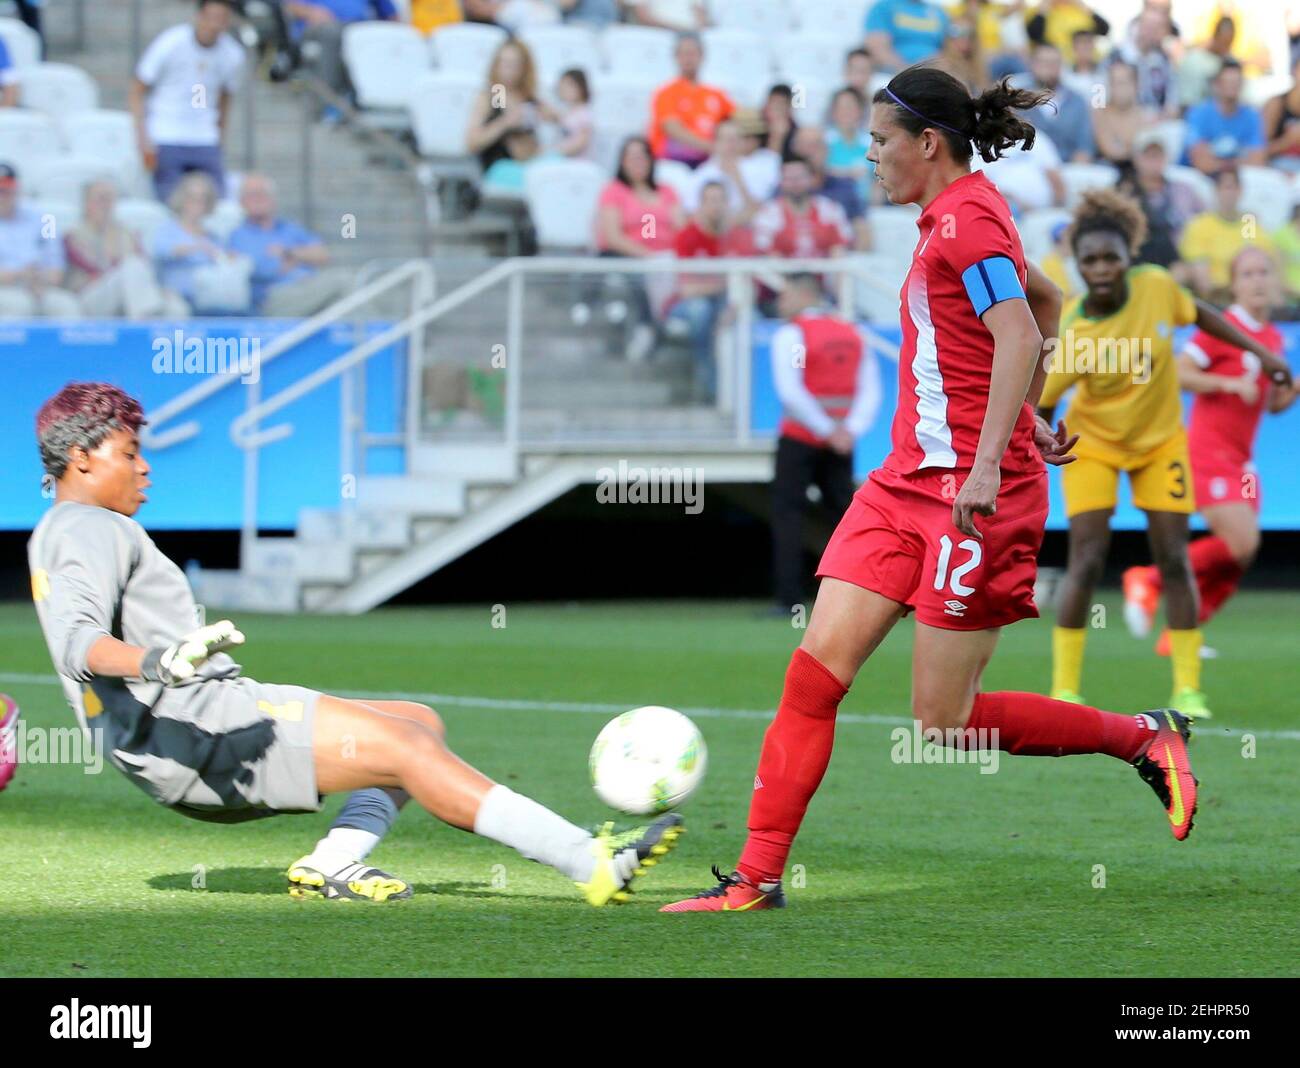 2016 Rio Olympics - Soccer - Preliminary - Women's First Round - Group F Canada v Zimbabwe - Corinthians Arena - Sao Paulo, Brazil - 06/08/2016. Christine Sinclair (CAN) of Canada and Goalkeeper Chido Dzingirai (ZIM) of Zimbabwe in action. REUTERS/Paulo Whitaker FOR EDITORIAL USE ONLY. NOT FOR SALE FOR MARKETING OR ADVERTISING CAMPAIGNS.   Picture Supplied by Action Images Stock Photo